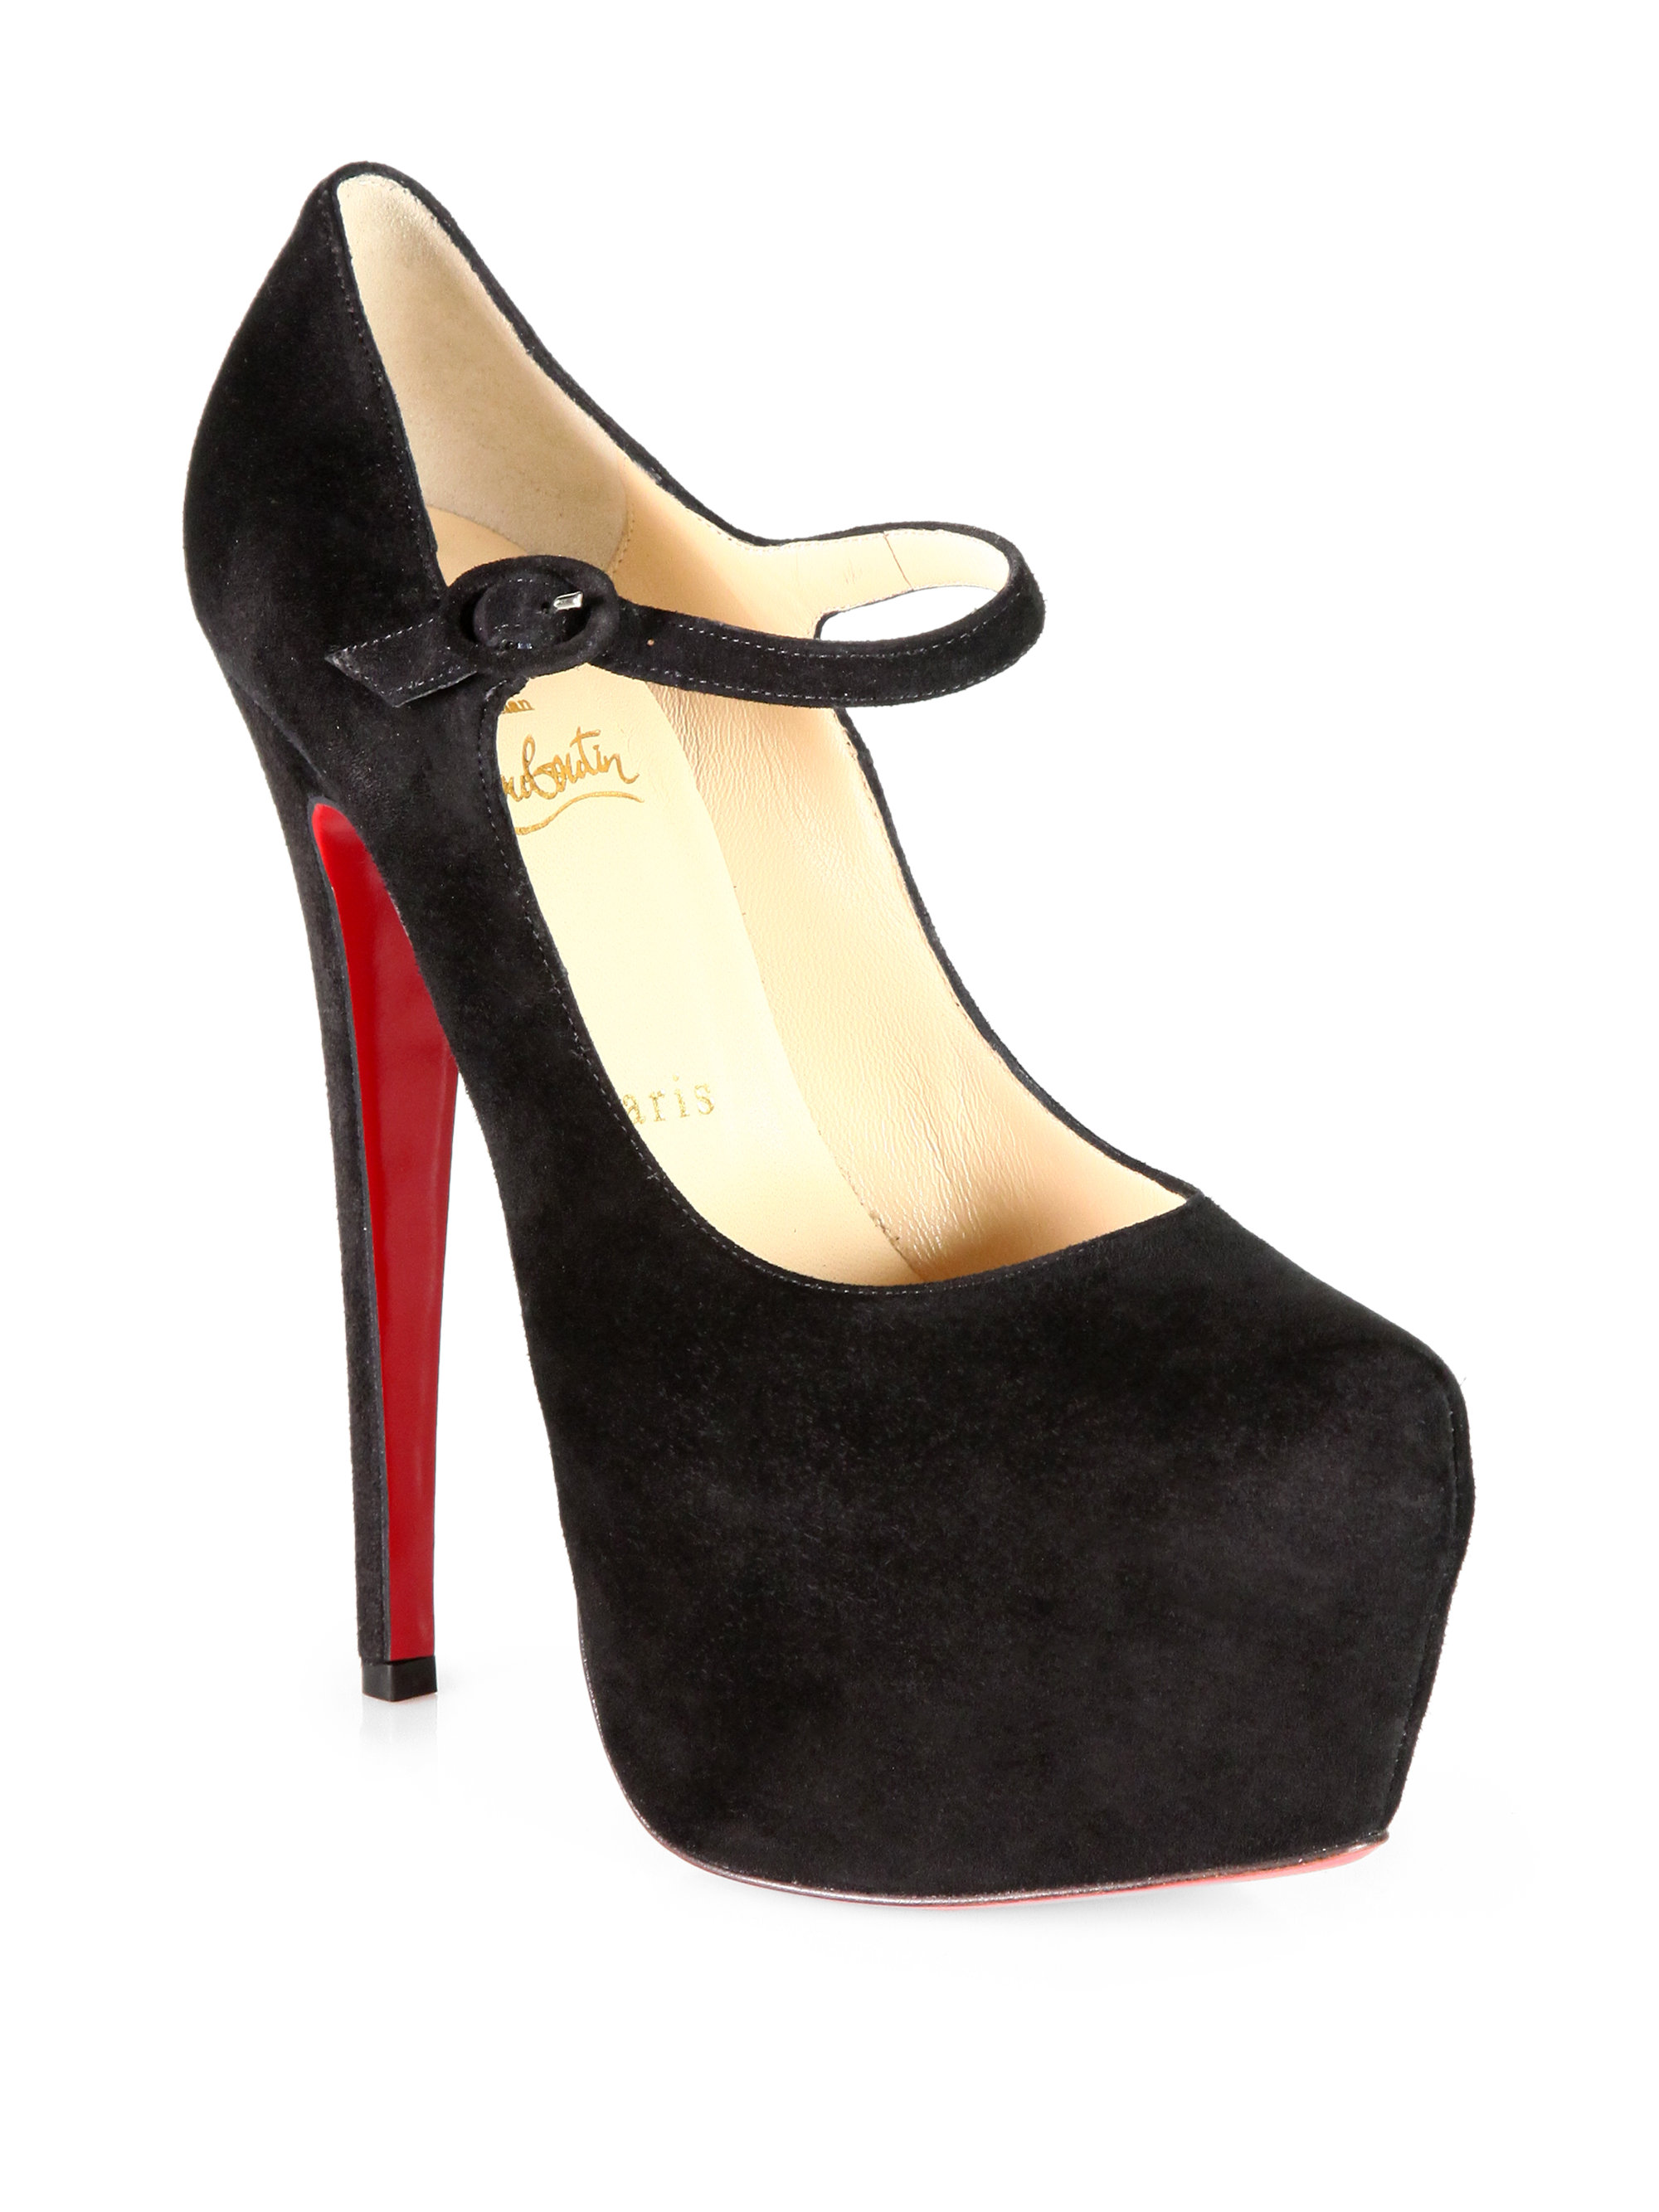 Lyst - Christian Louboutin Leather Platform Mary Jane Pumps in Black